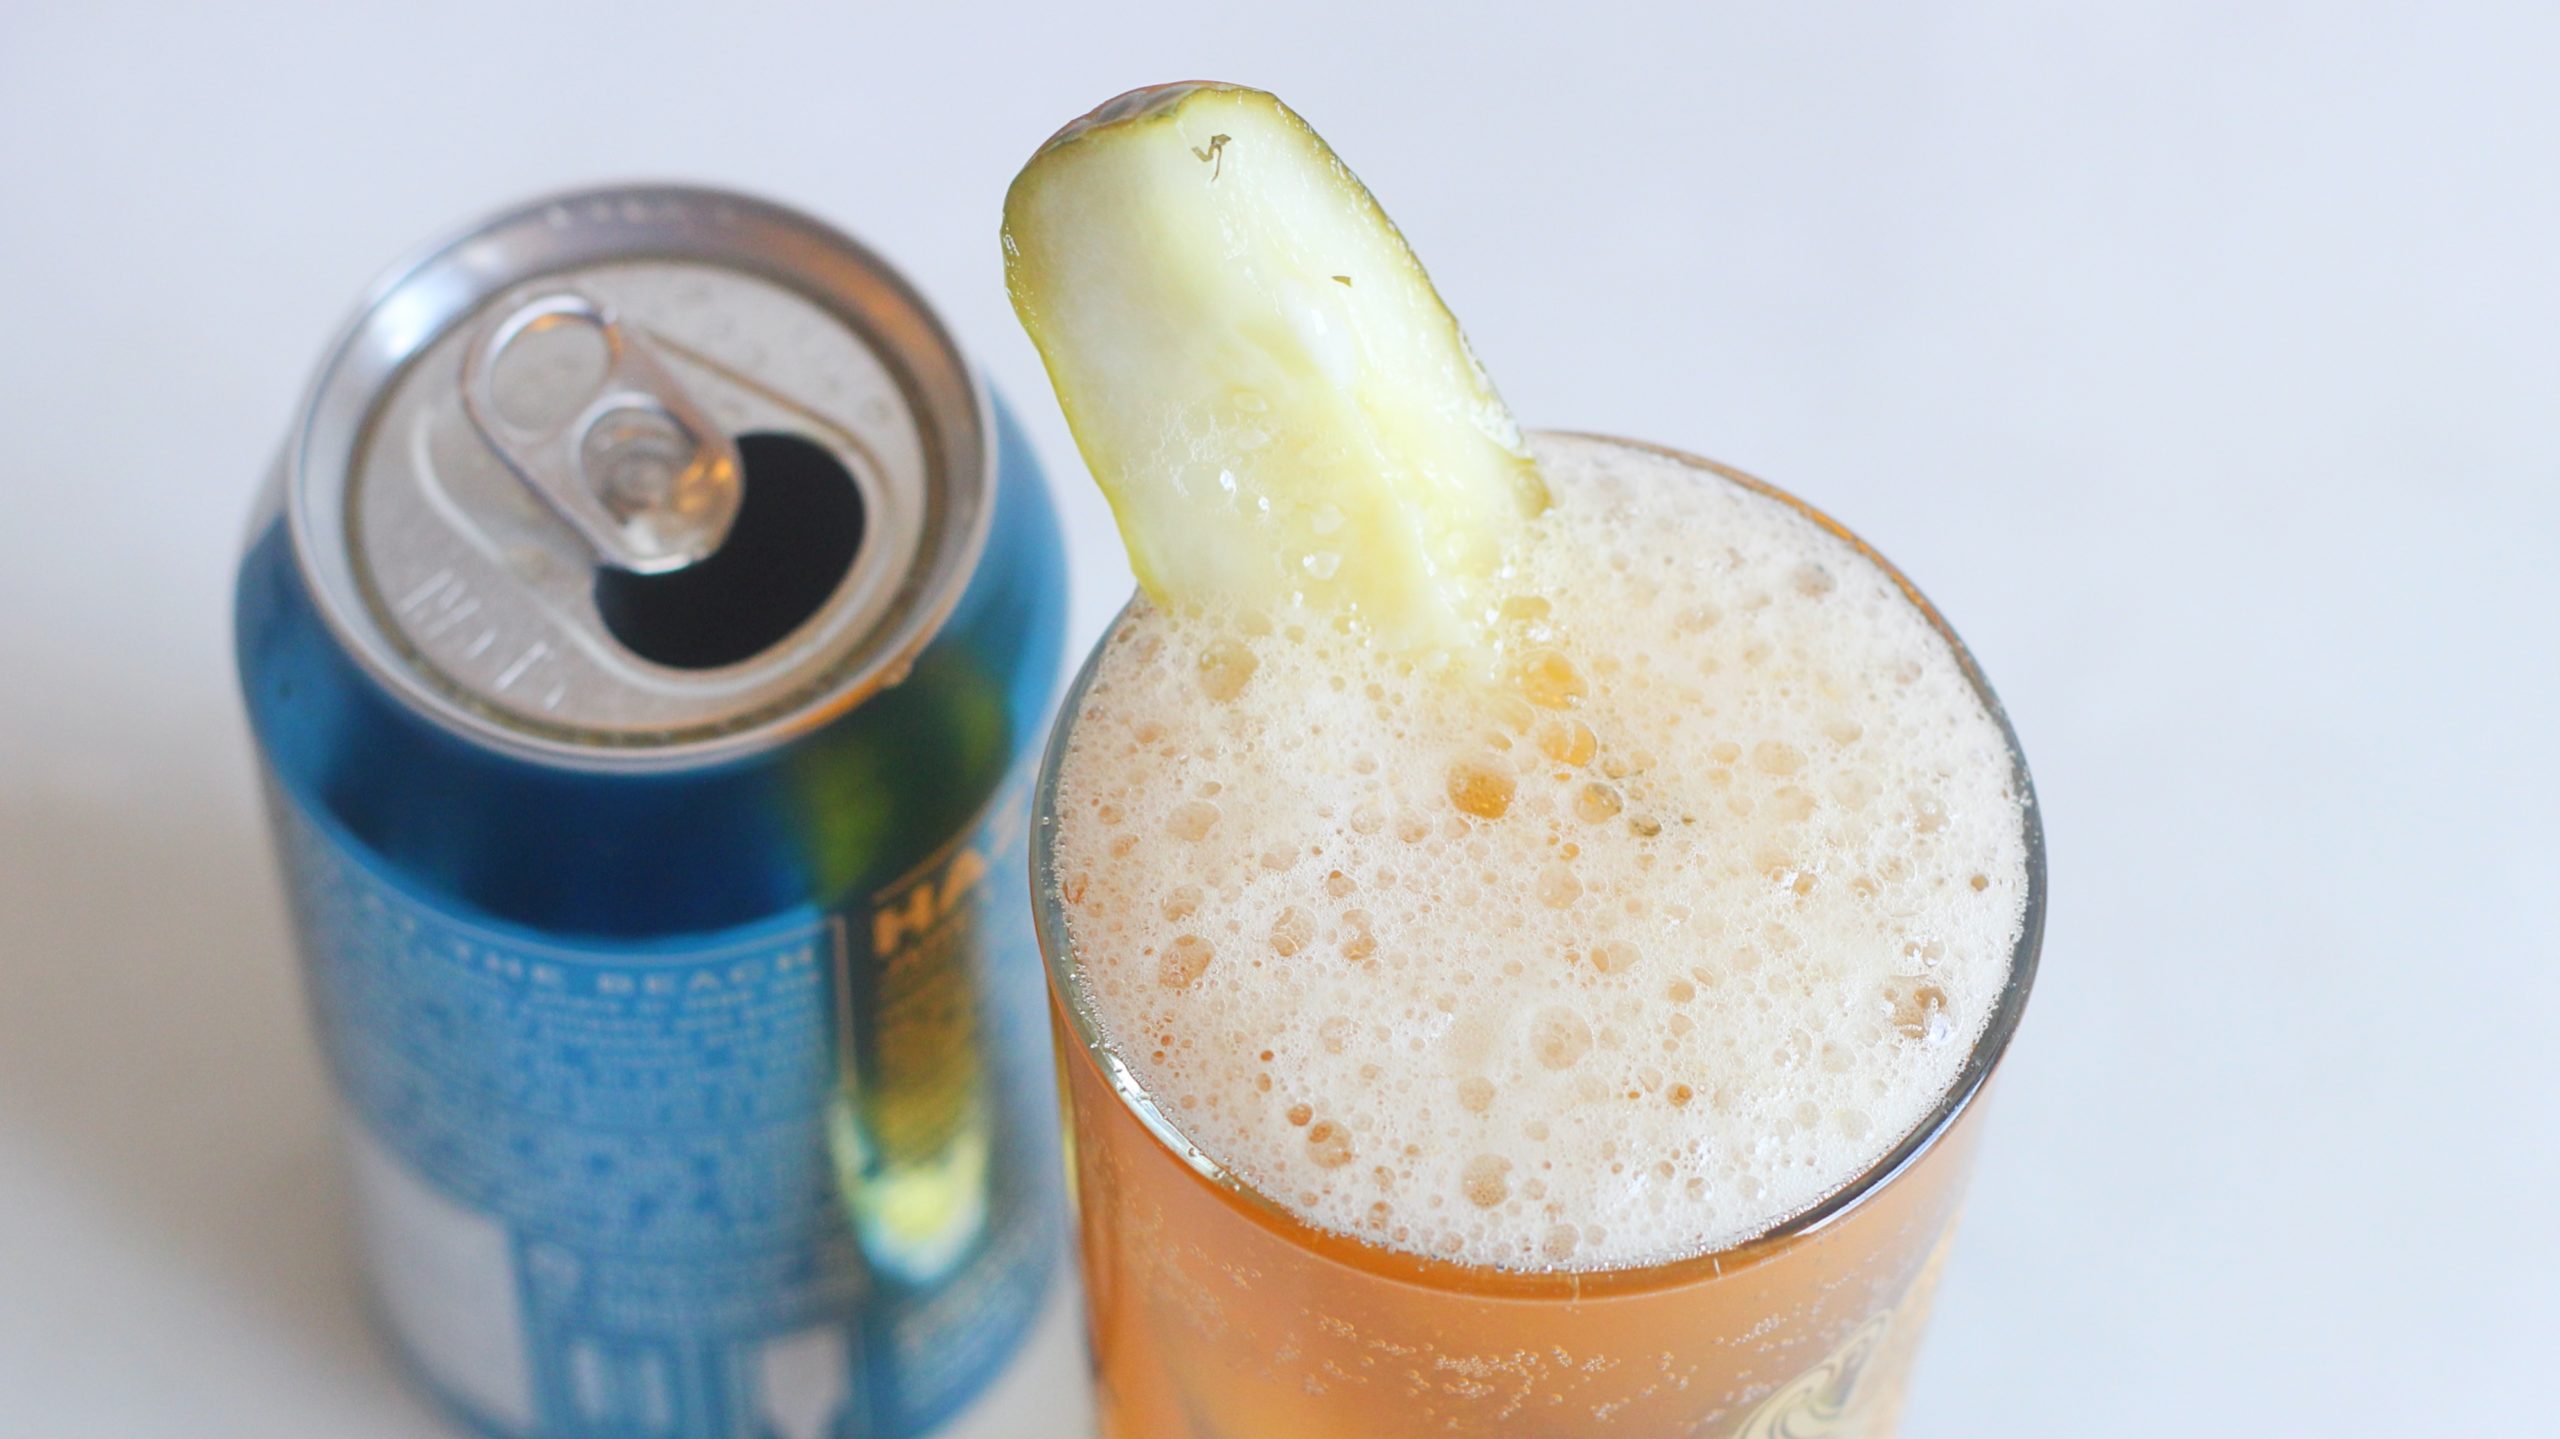 Put a Pickle in Your Shitty Beer